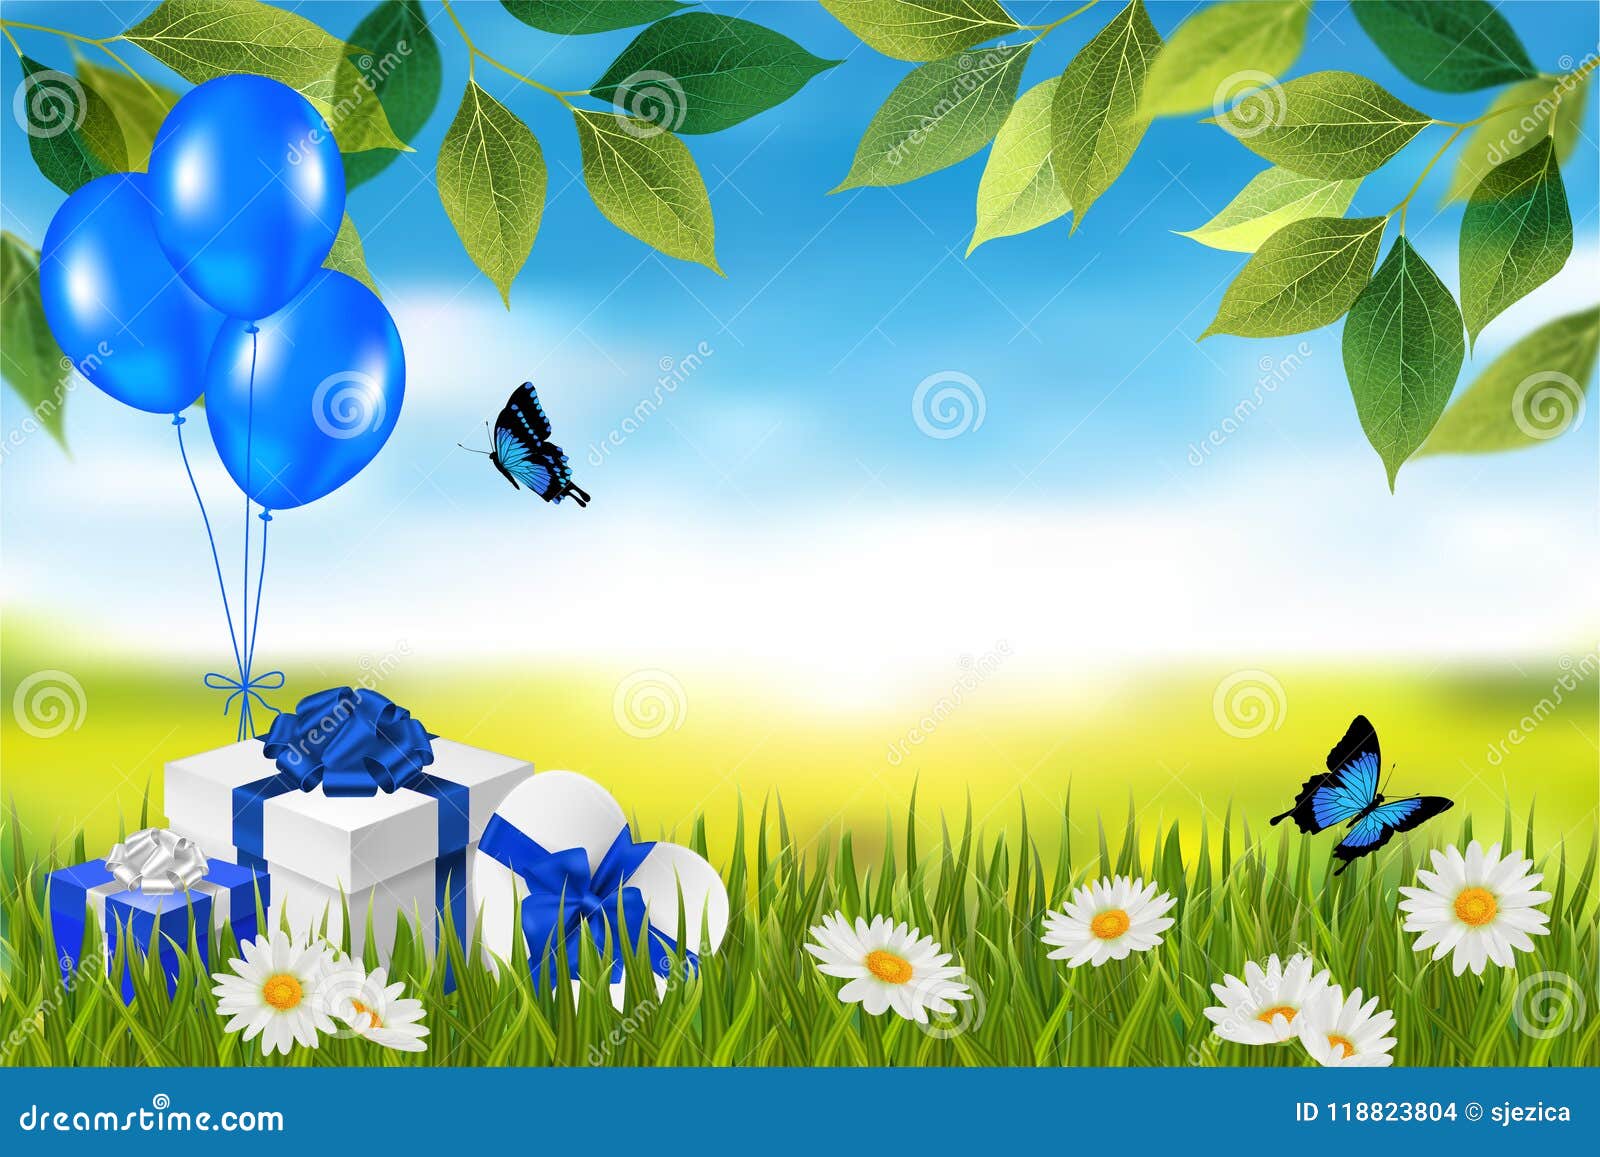 Presents in Grass. Natural Background. Vector Stock Vector ...